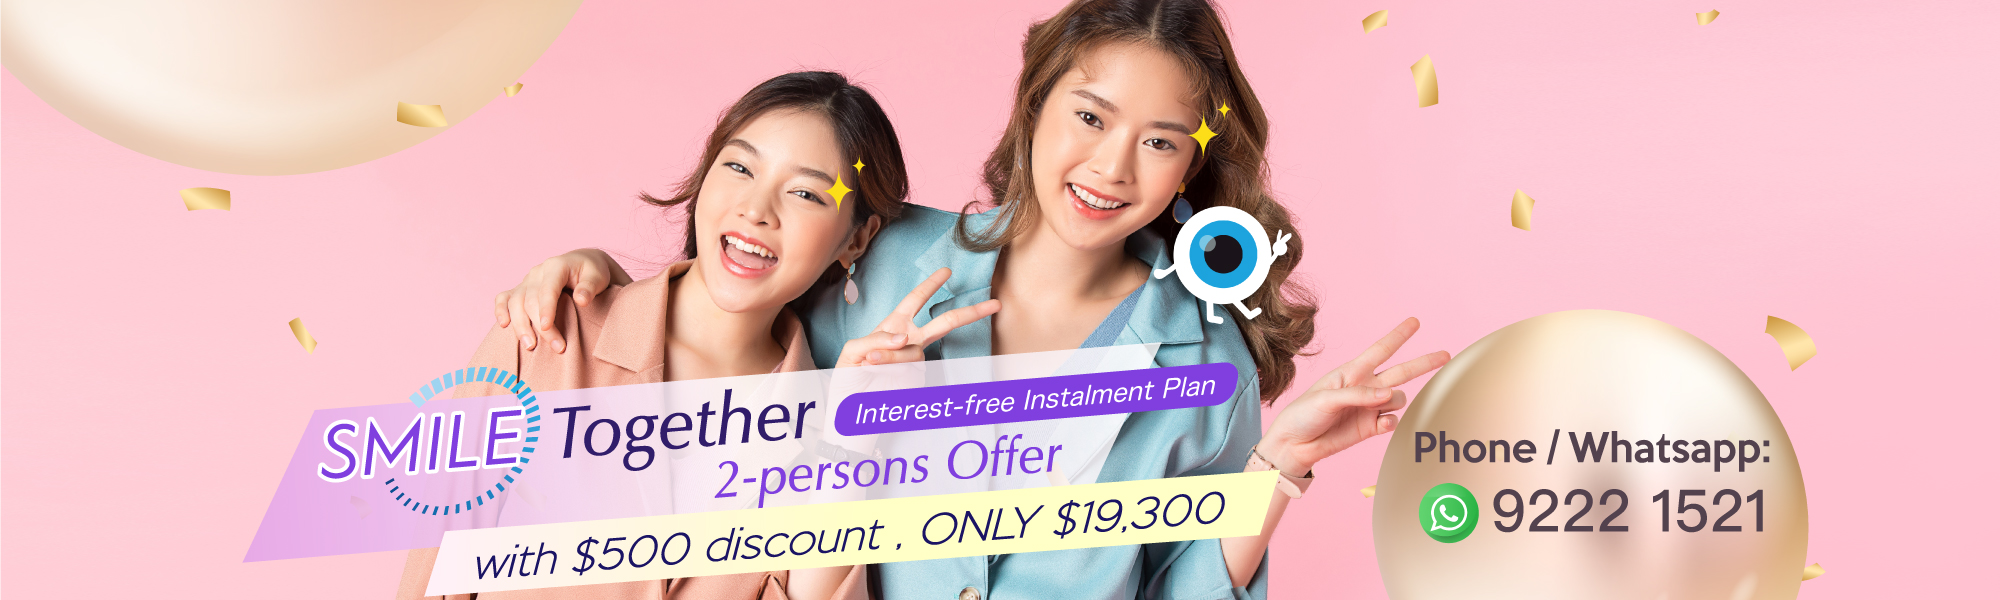 SMILE Together 2-person offer